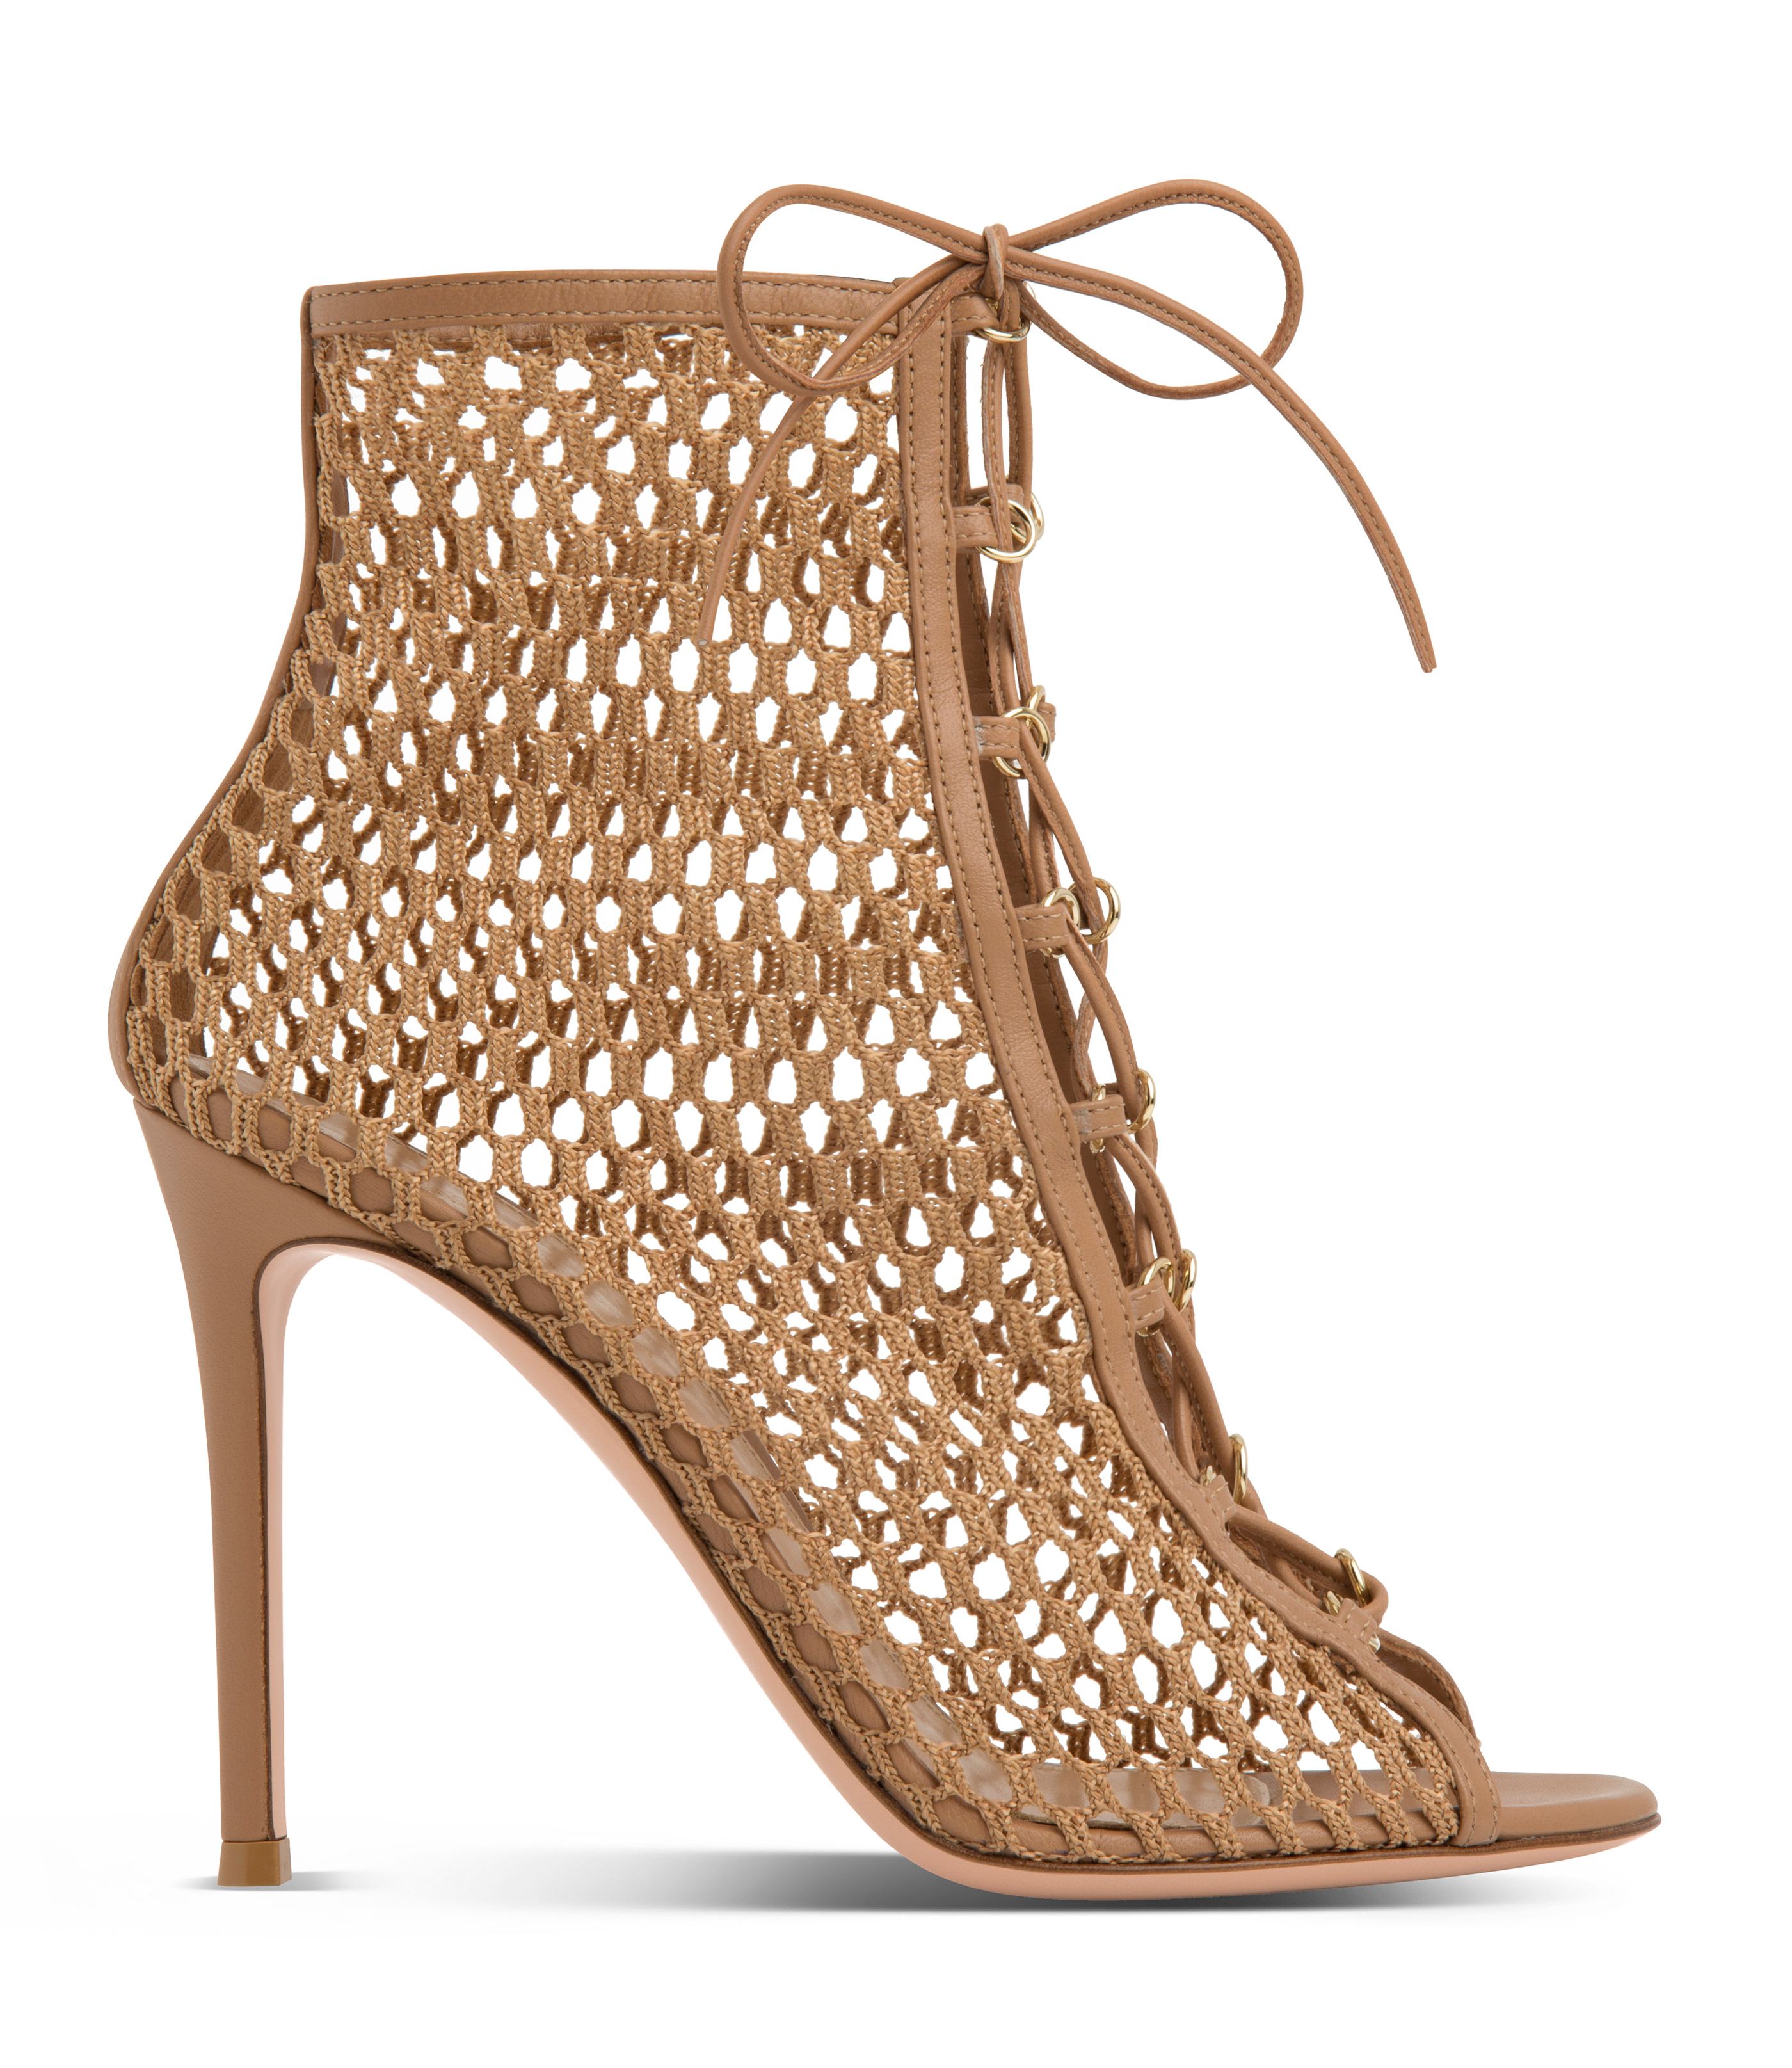 Set on a 105mm stiletto heel, the lace-up open toe Gianvito Rossi Helena Bootie is made of ultra-soft fabric. The mesh in Praline color wraps around the ankle in a sensual game of hide-and-seek and creates an illusion of sheer skin camouflage.